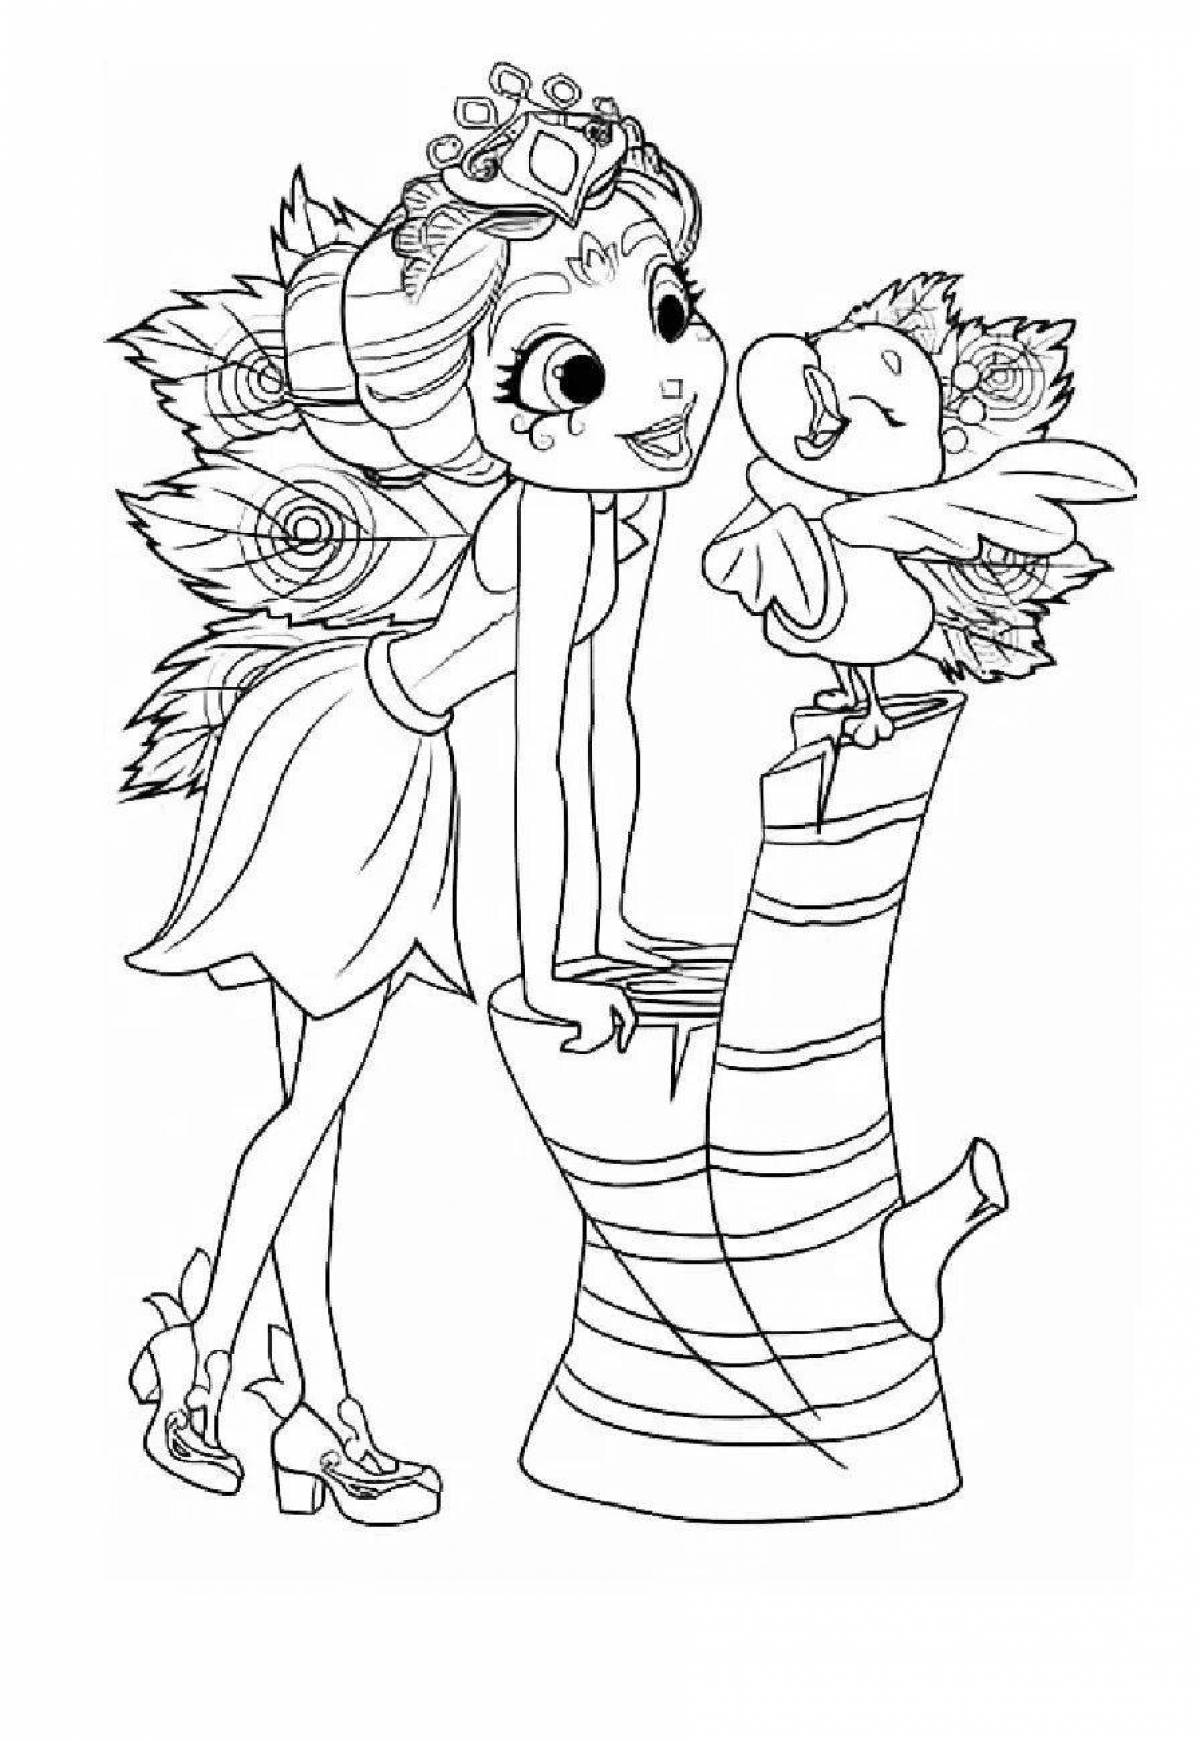 Entenchymal fairy tale coloring pages